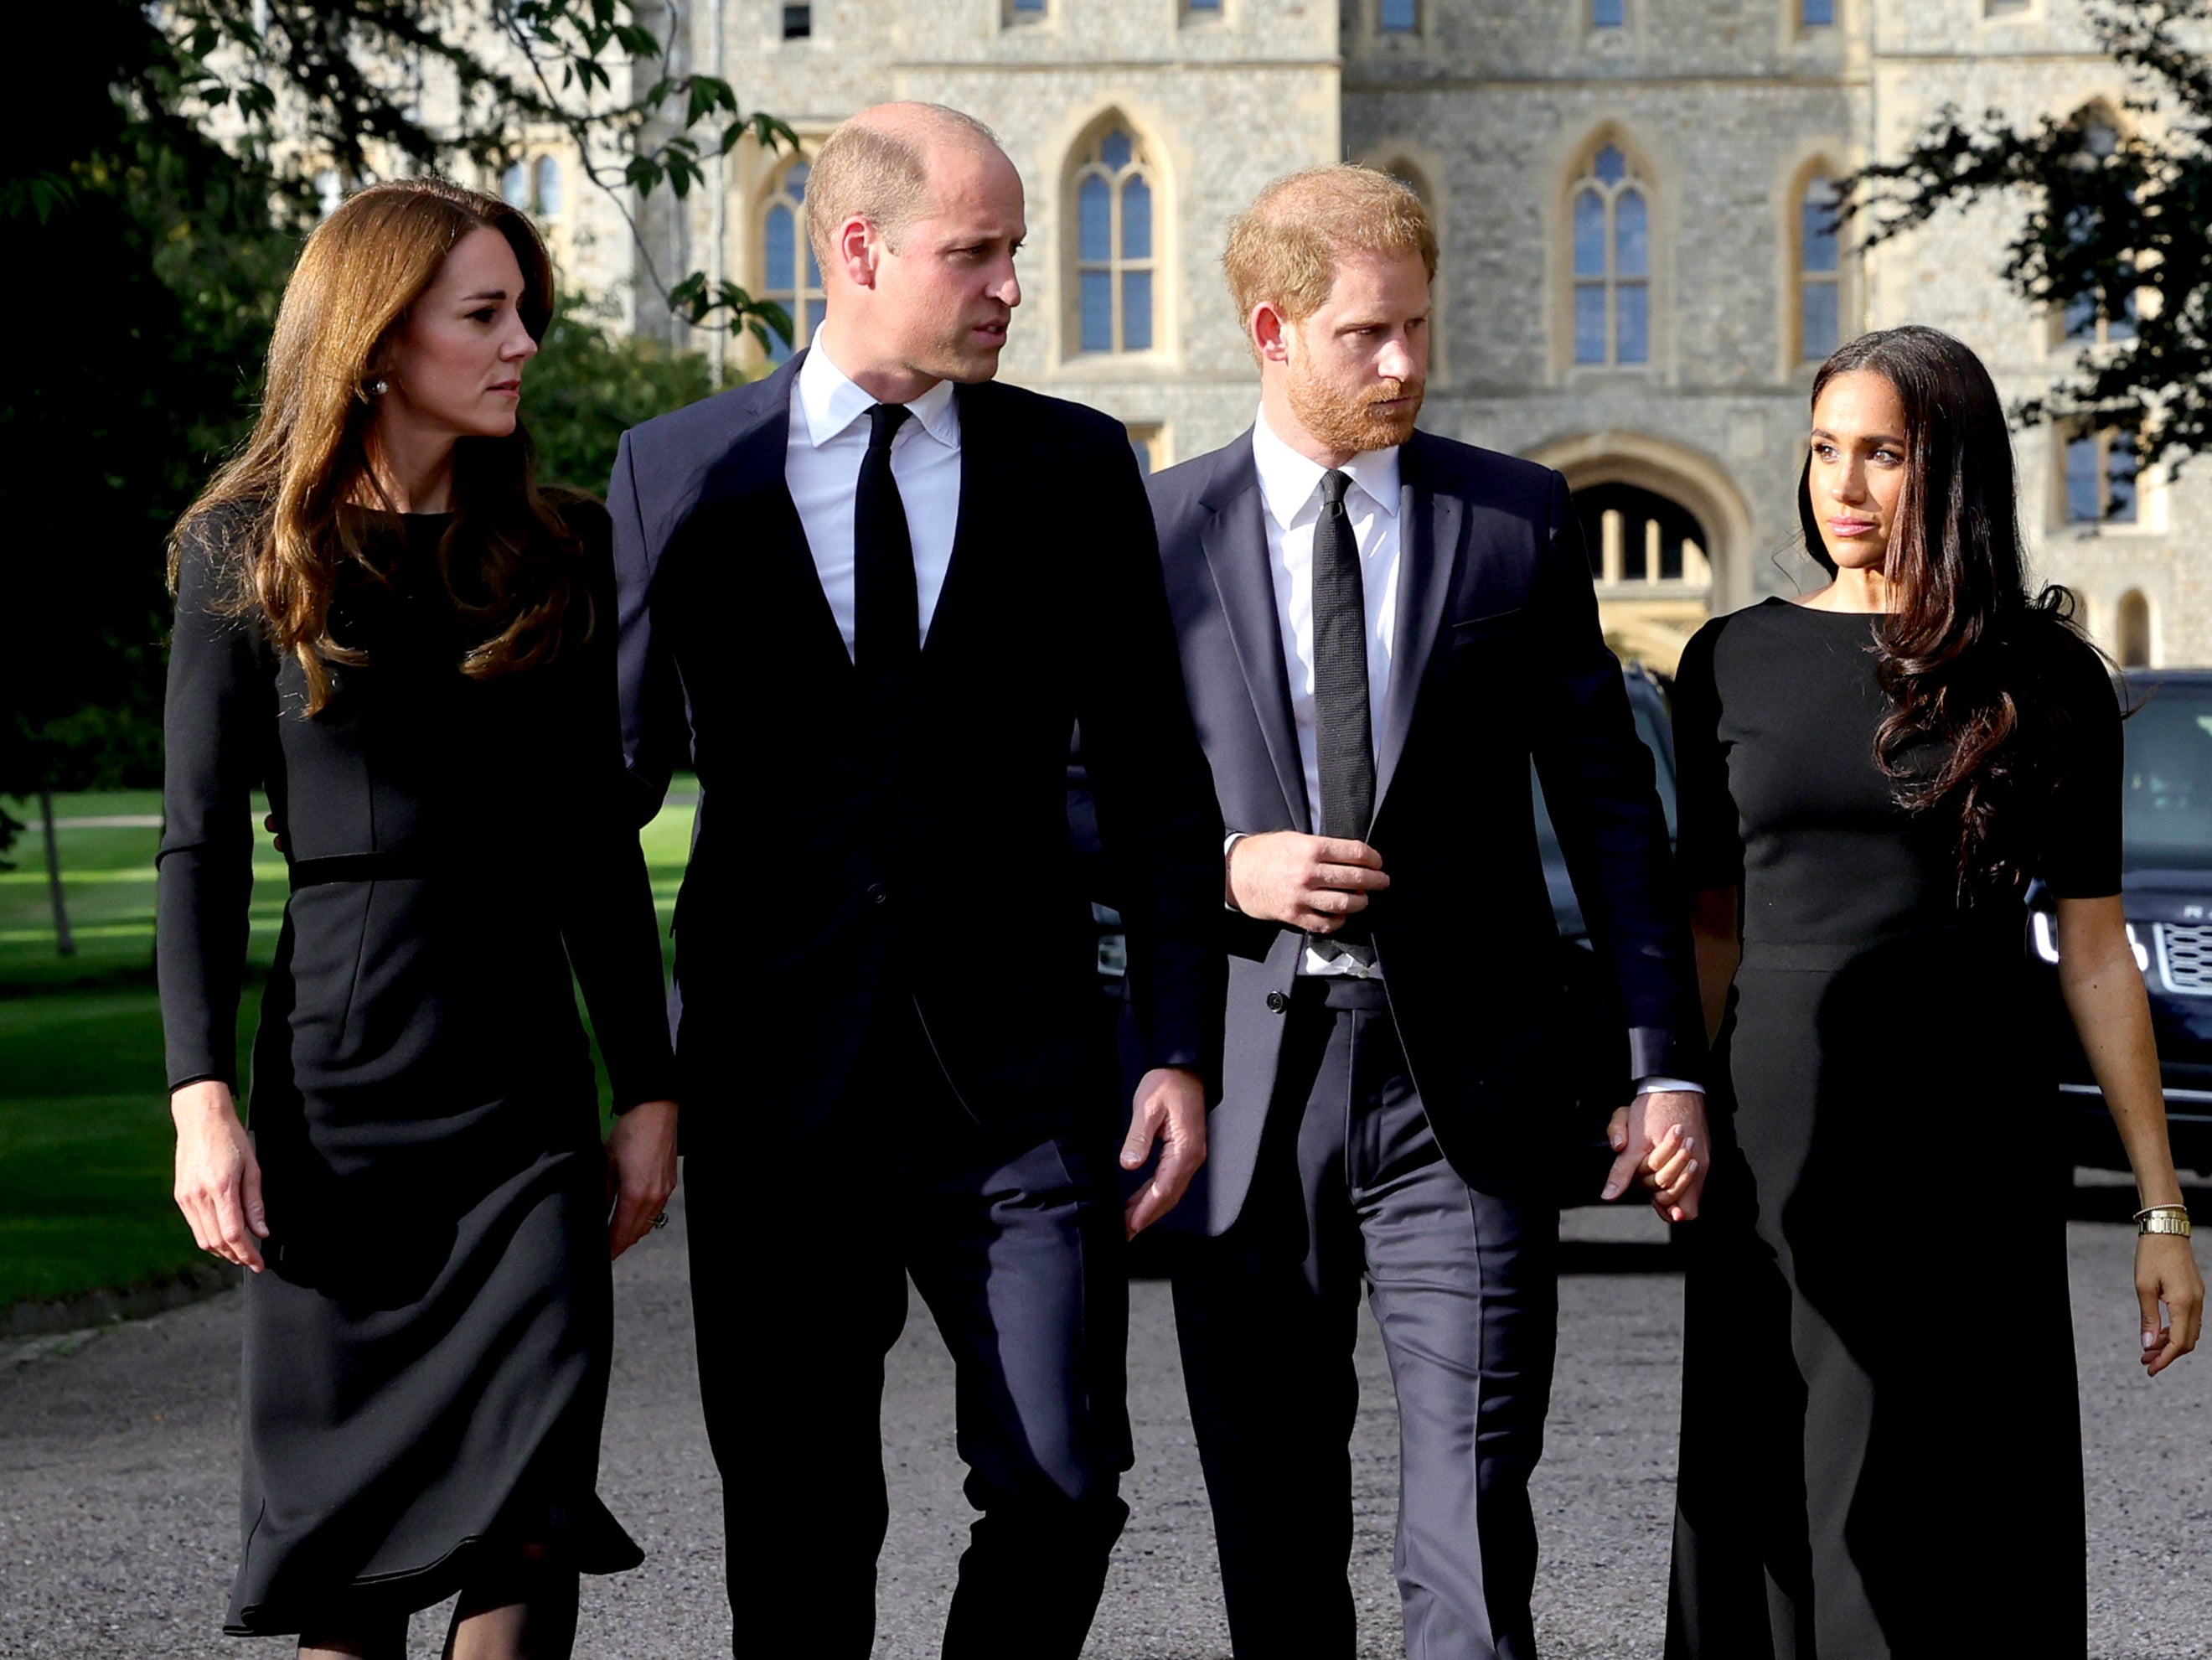 Catherine, Princess of Wales, Prince William, Prince of Wales, Prince Harry, Duke of Sussex, and Meghan, Duchess of Sussex